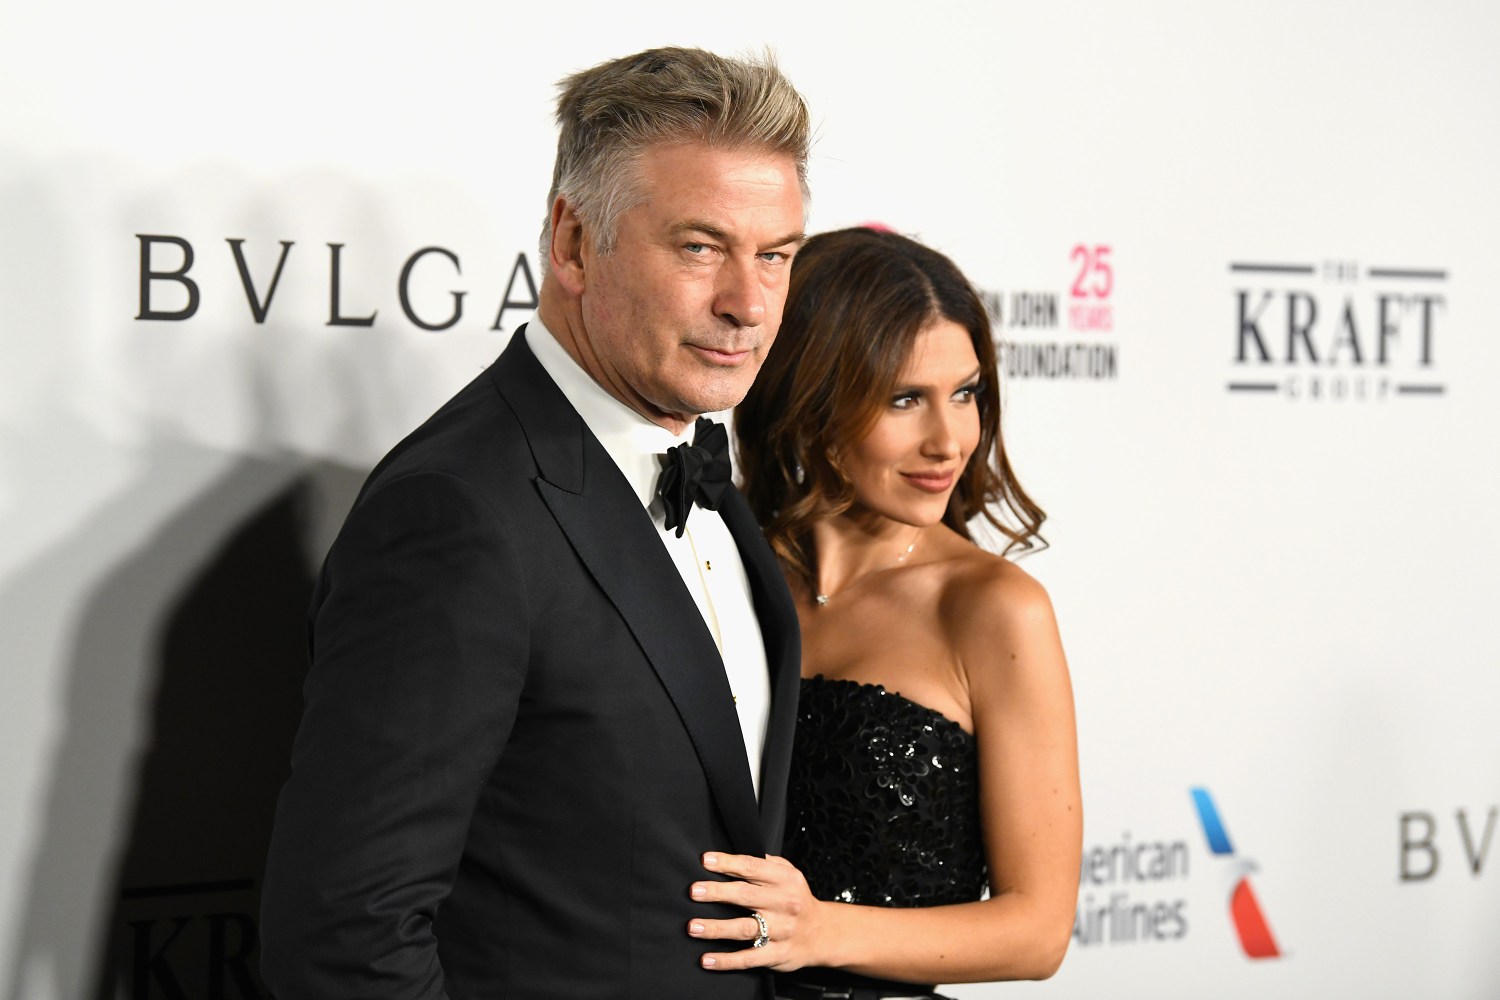 Criminal Lawyer Explains What Will Happen To Alec Baldwin After Shooting